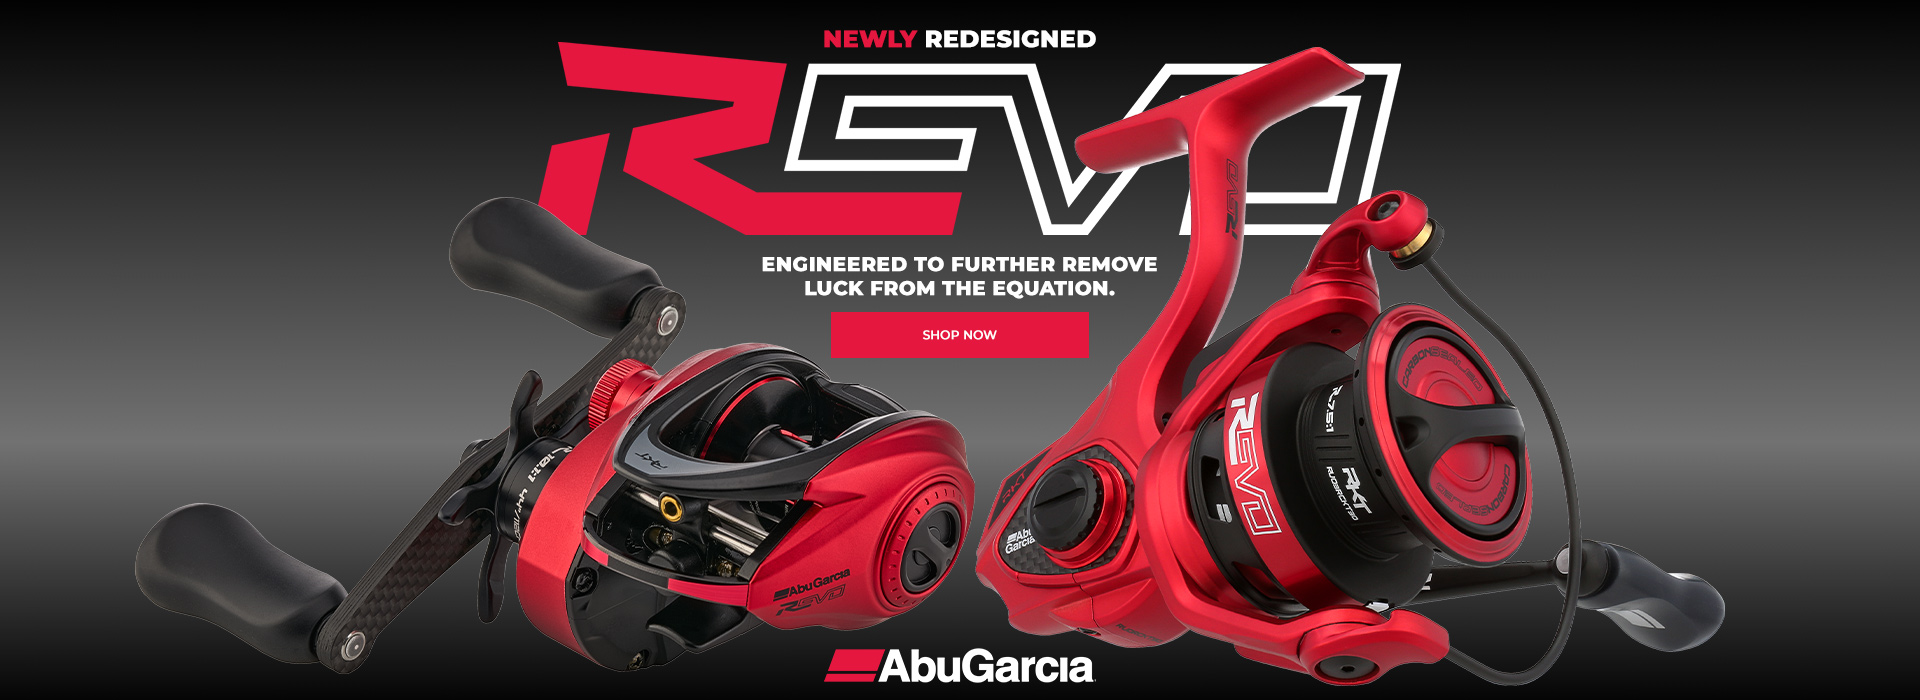 Introducing the next generation of Revo fishing reels